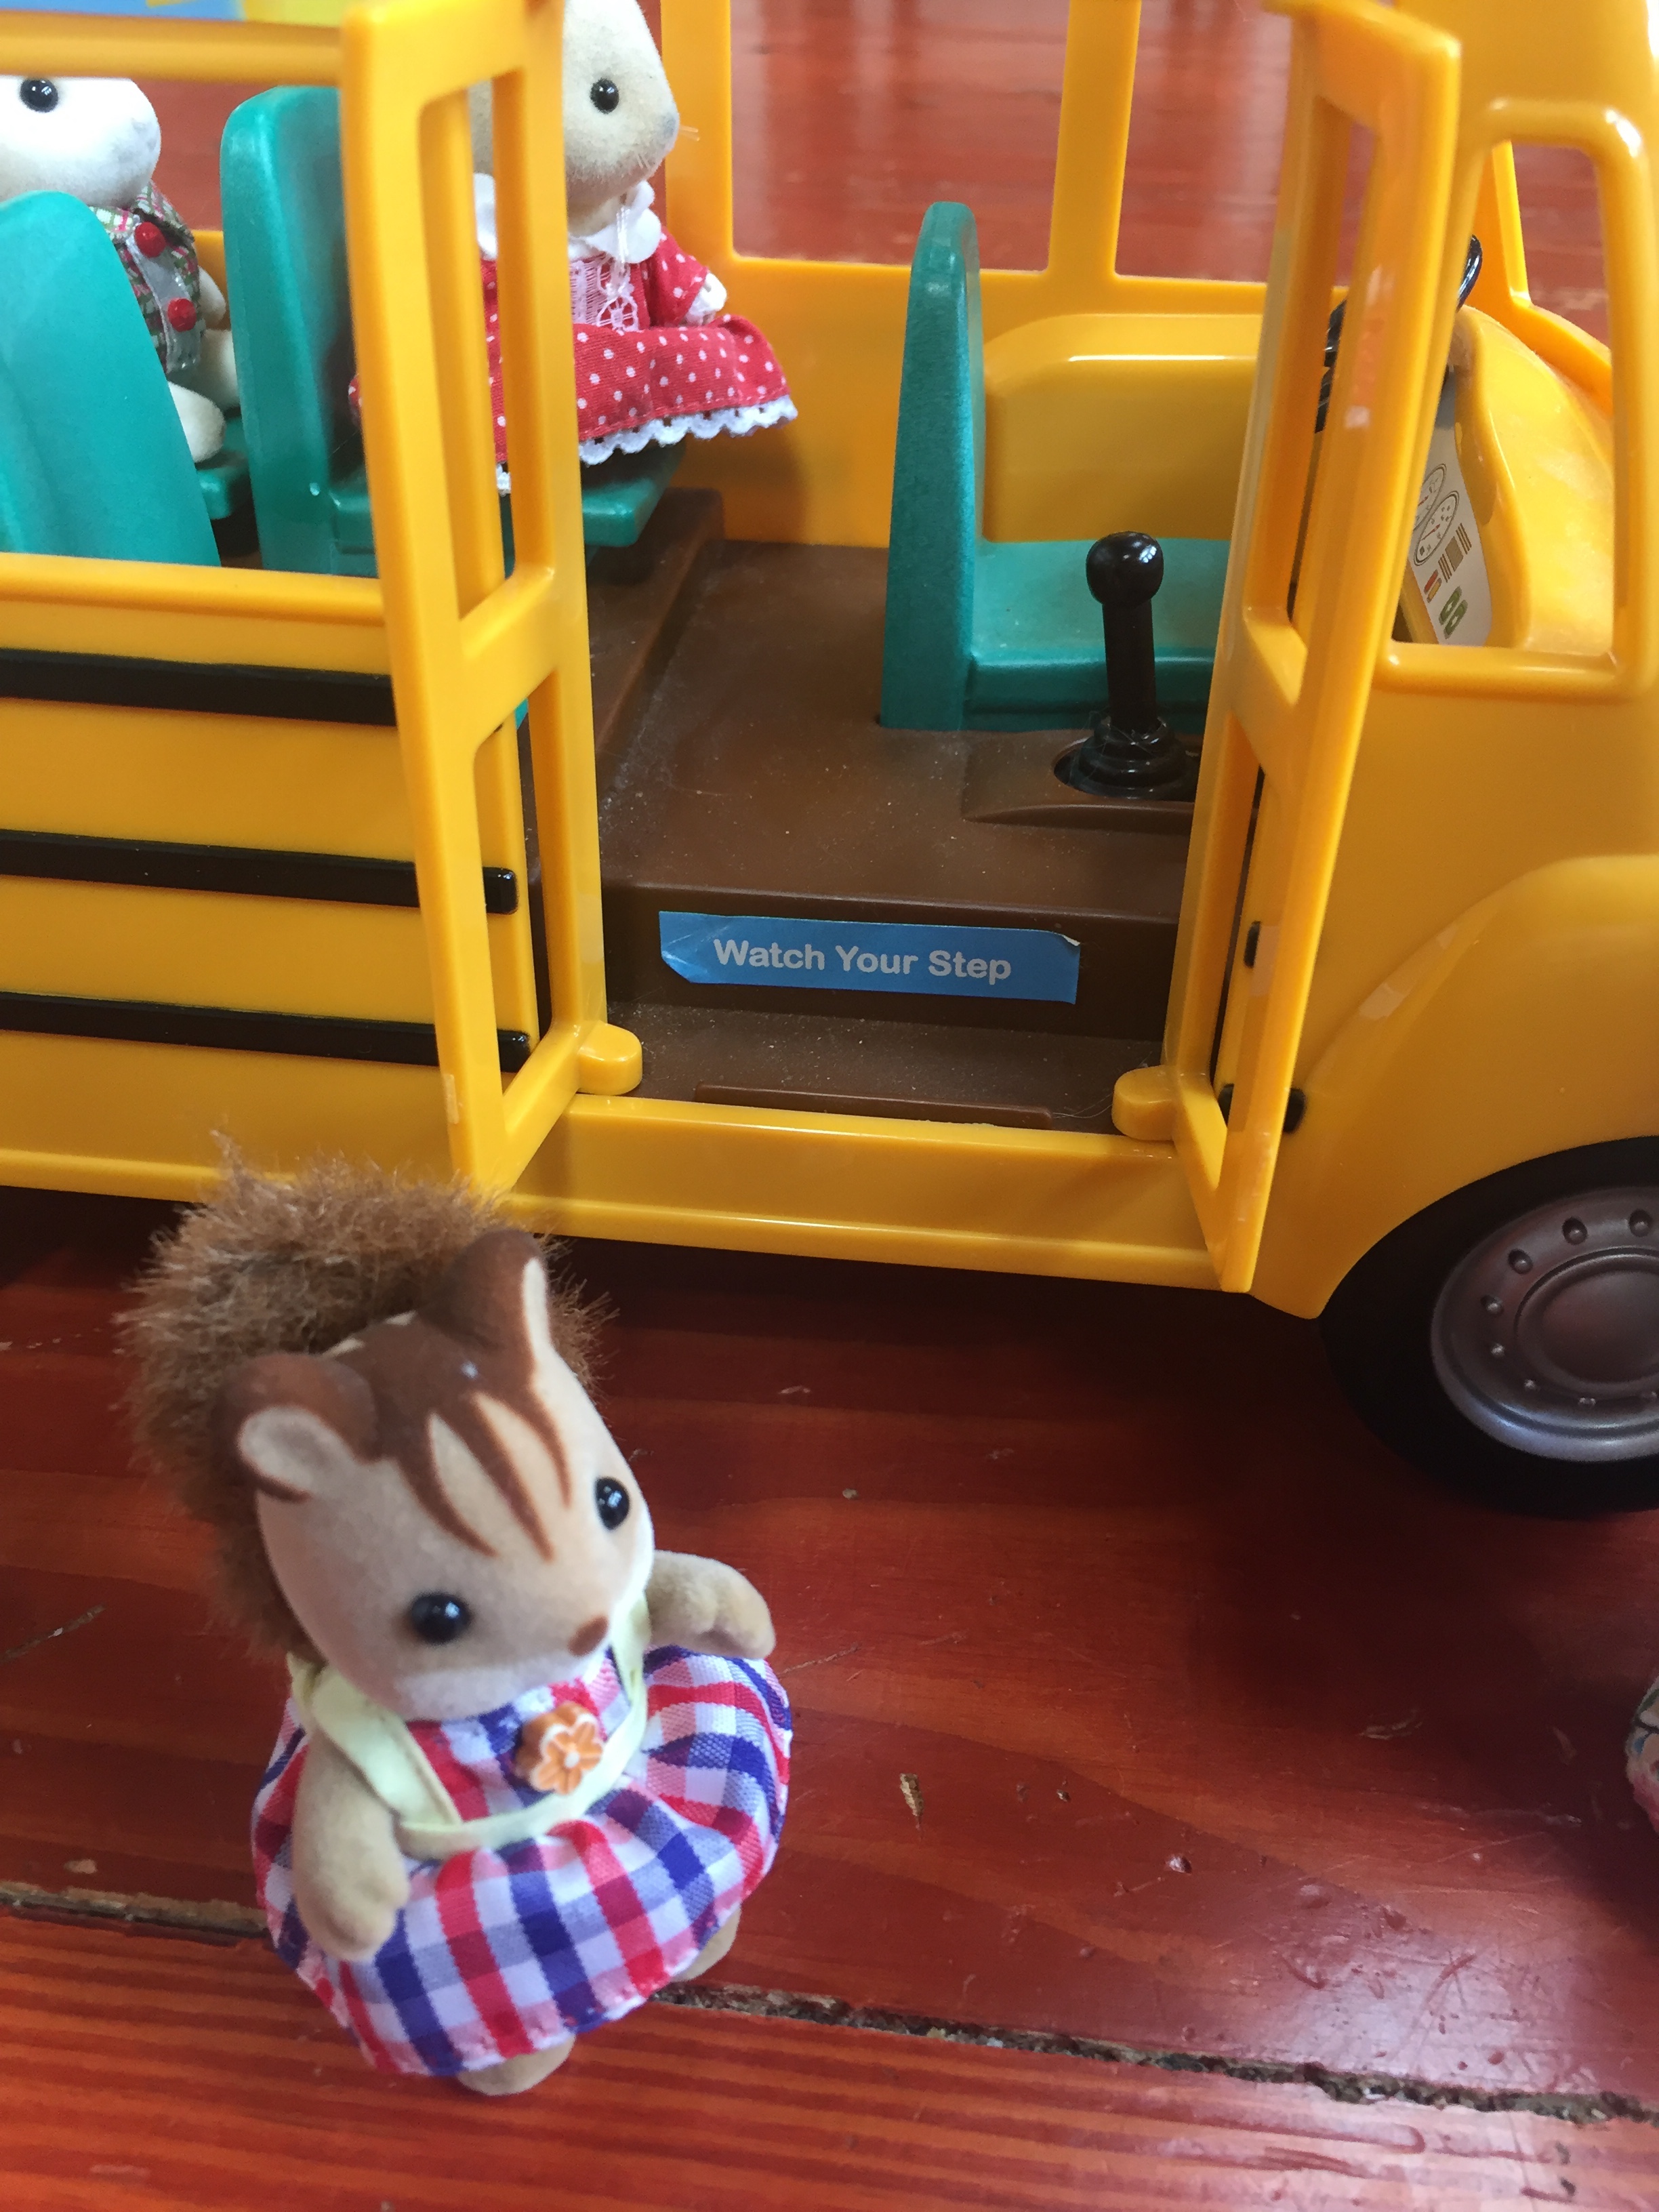 Calico Critters School Bus with door open and kid squirrel waiting to get on